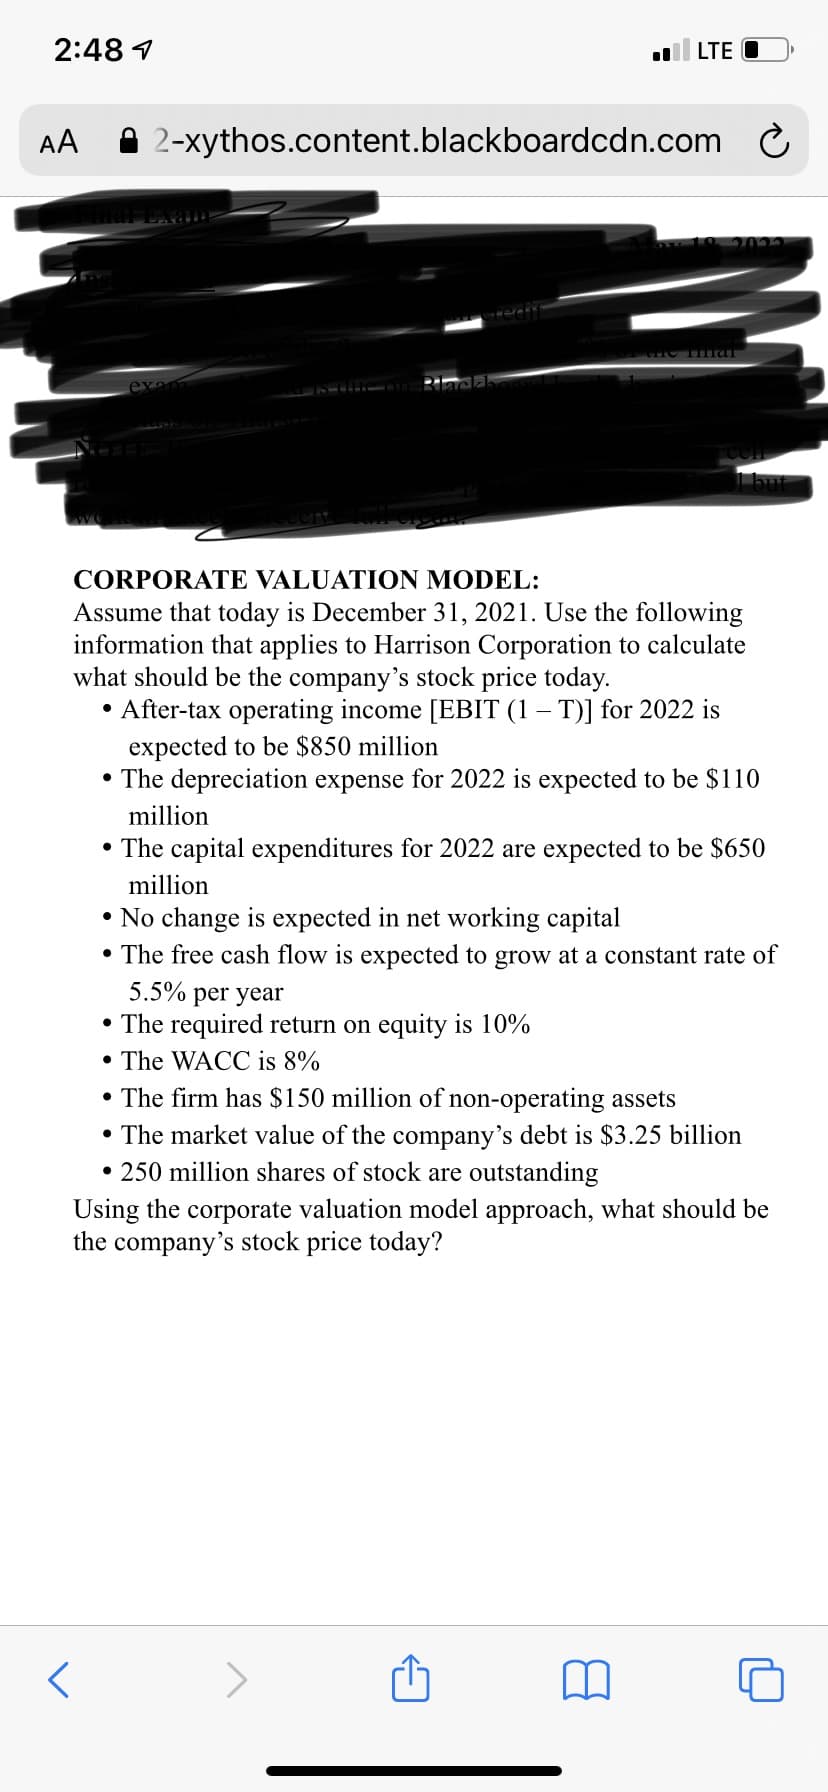 2:48 1
LTE O
AA
A 2-xythos.content.blackboardcdn.com C
10 2022
but
CORPORATE VALUATION MODEL:
Assume that today is December 31, 2021. Use the following
information that applies to Harrison Corporation to calculate
what should be the company's stock price today.
• After-tax operating income [EBIT (1 – T)] for 2022 is
expected to be $850 million
• The depreciation expense for 2022 is expected to be $110
million
• The capital expenditures for 2022 are expected to be $650
million
• No change is expected in net working capital
• The free cash flow is expected to grow at a constant rate of
5.5%
per year
• The required return on equity is 10%
• The WACC is 8%
• The firm has $150 million of non-operating assets
• The market value of the company's debt is $3.25 billion
• 250 million shares of stock are outstanding
Using the corporate valuation model approach, what should be
the company's stock price today?
